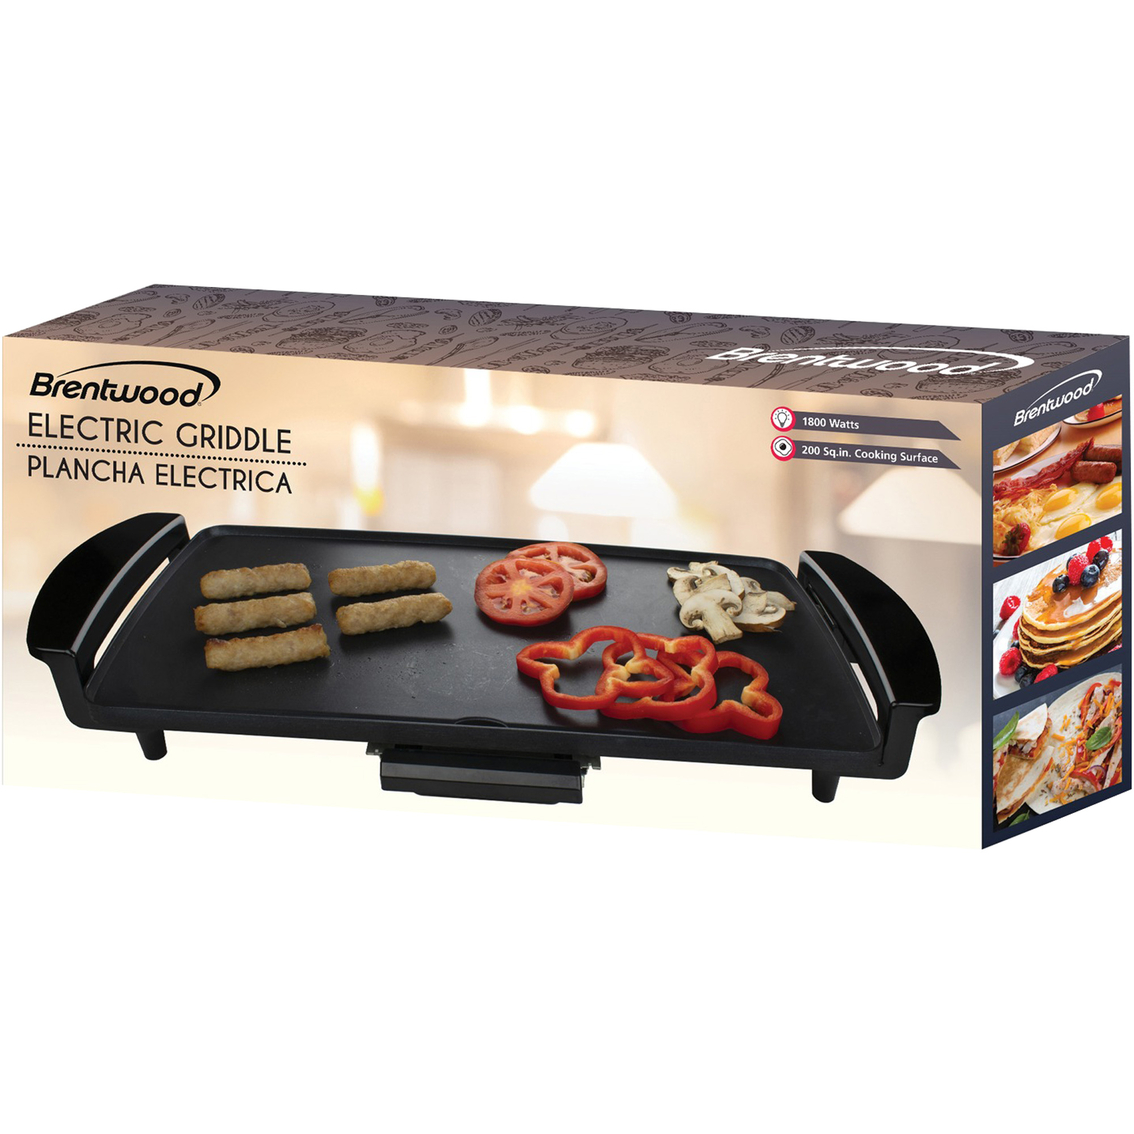 Brentwood Nonstick Electric Griddle with Drip Pan - Image 2 of 6